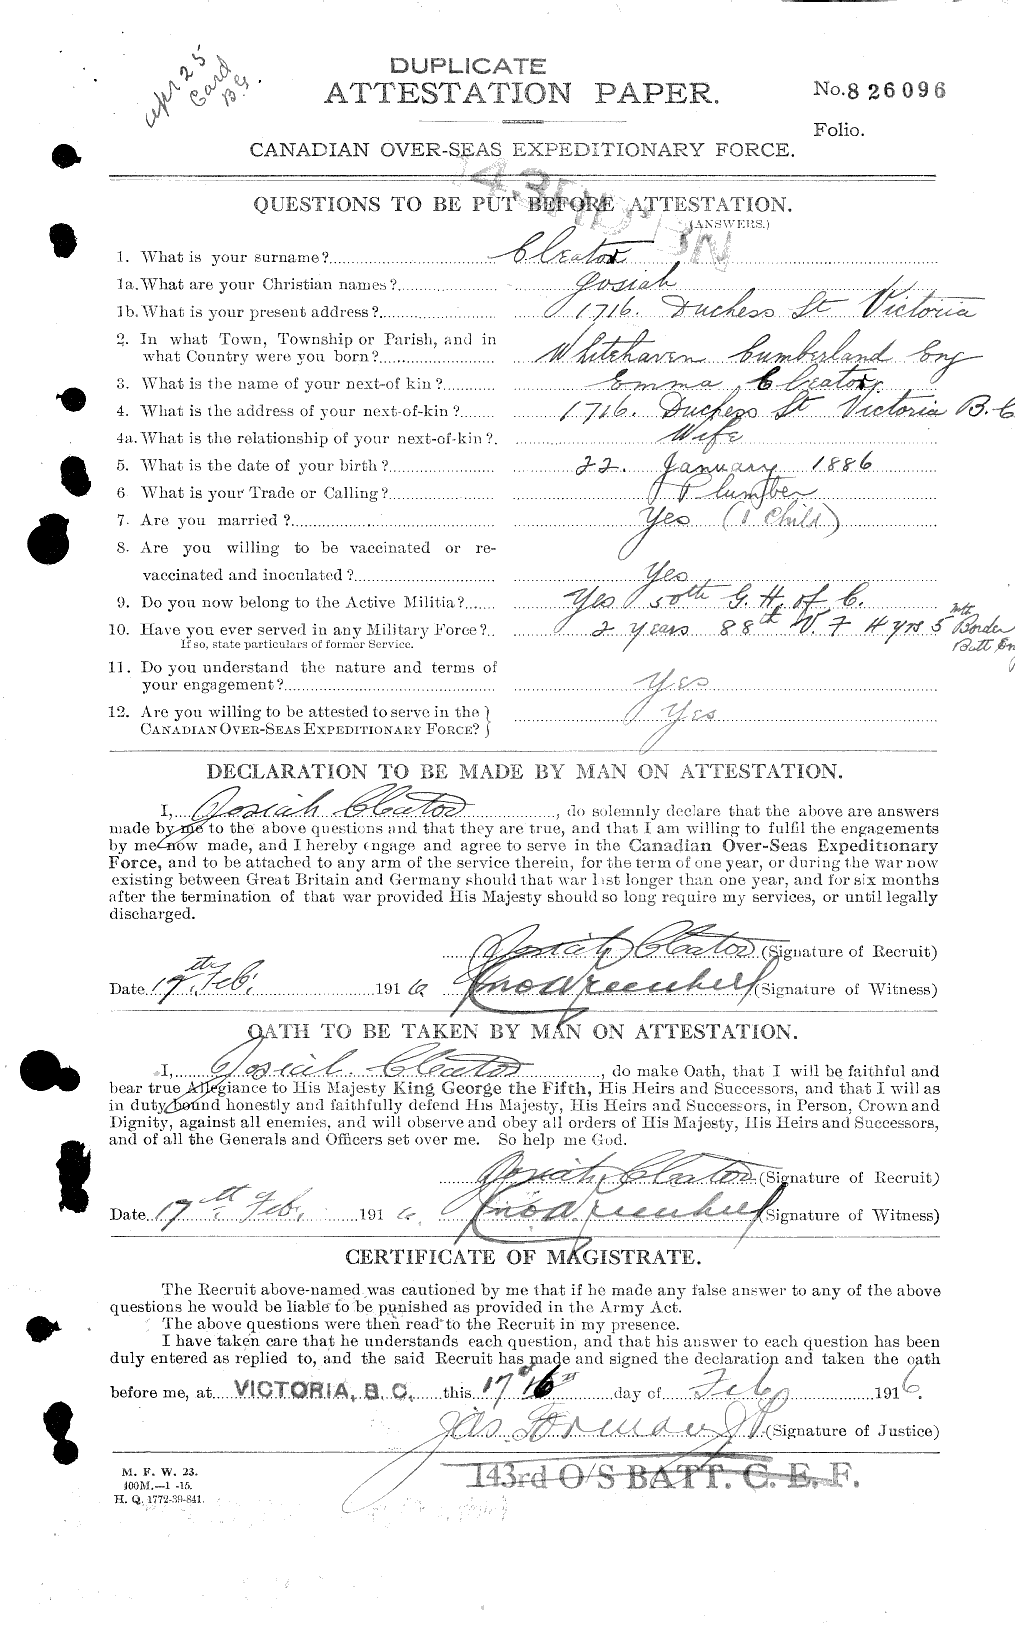 Personnel Records of the First World War - CEF 024861a